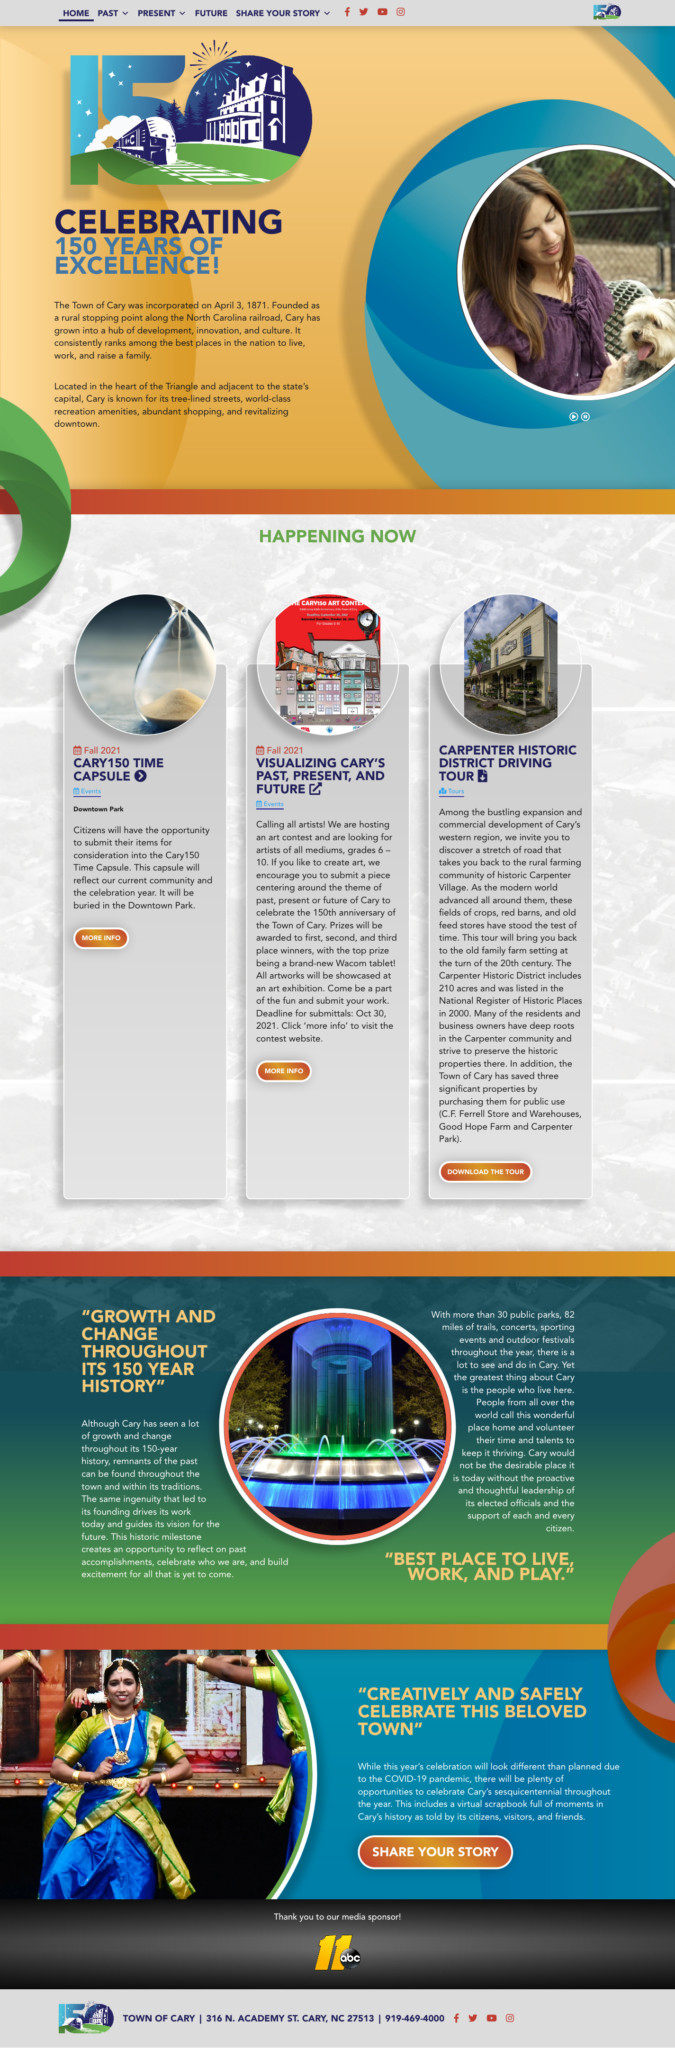 Homepage of the Cary150 website